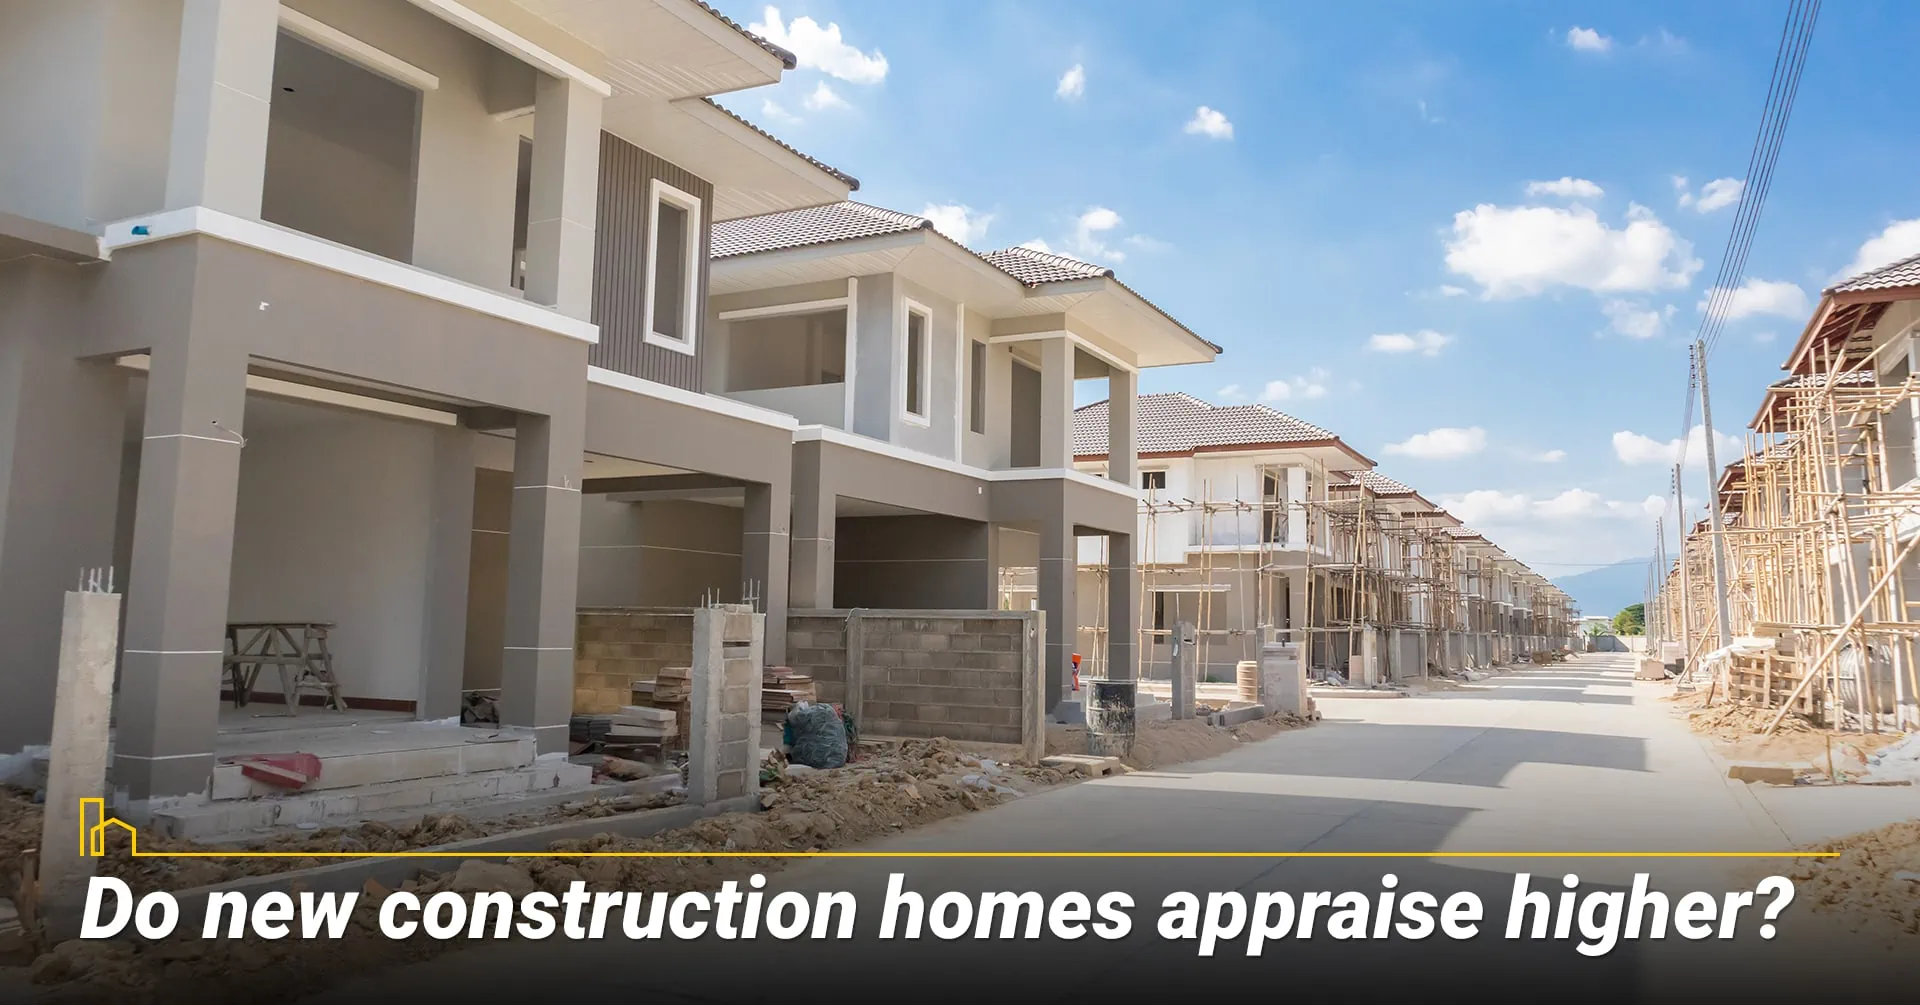 Do new construction homes appraise higher?